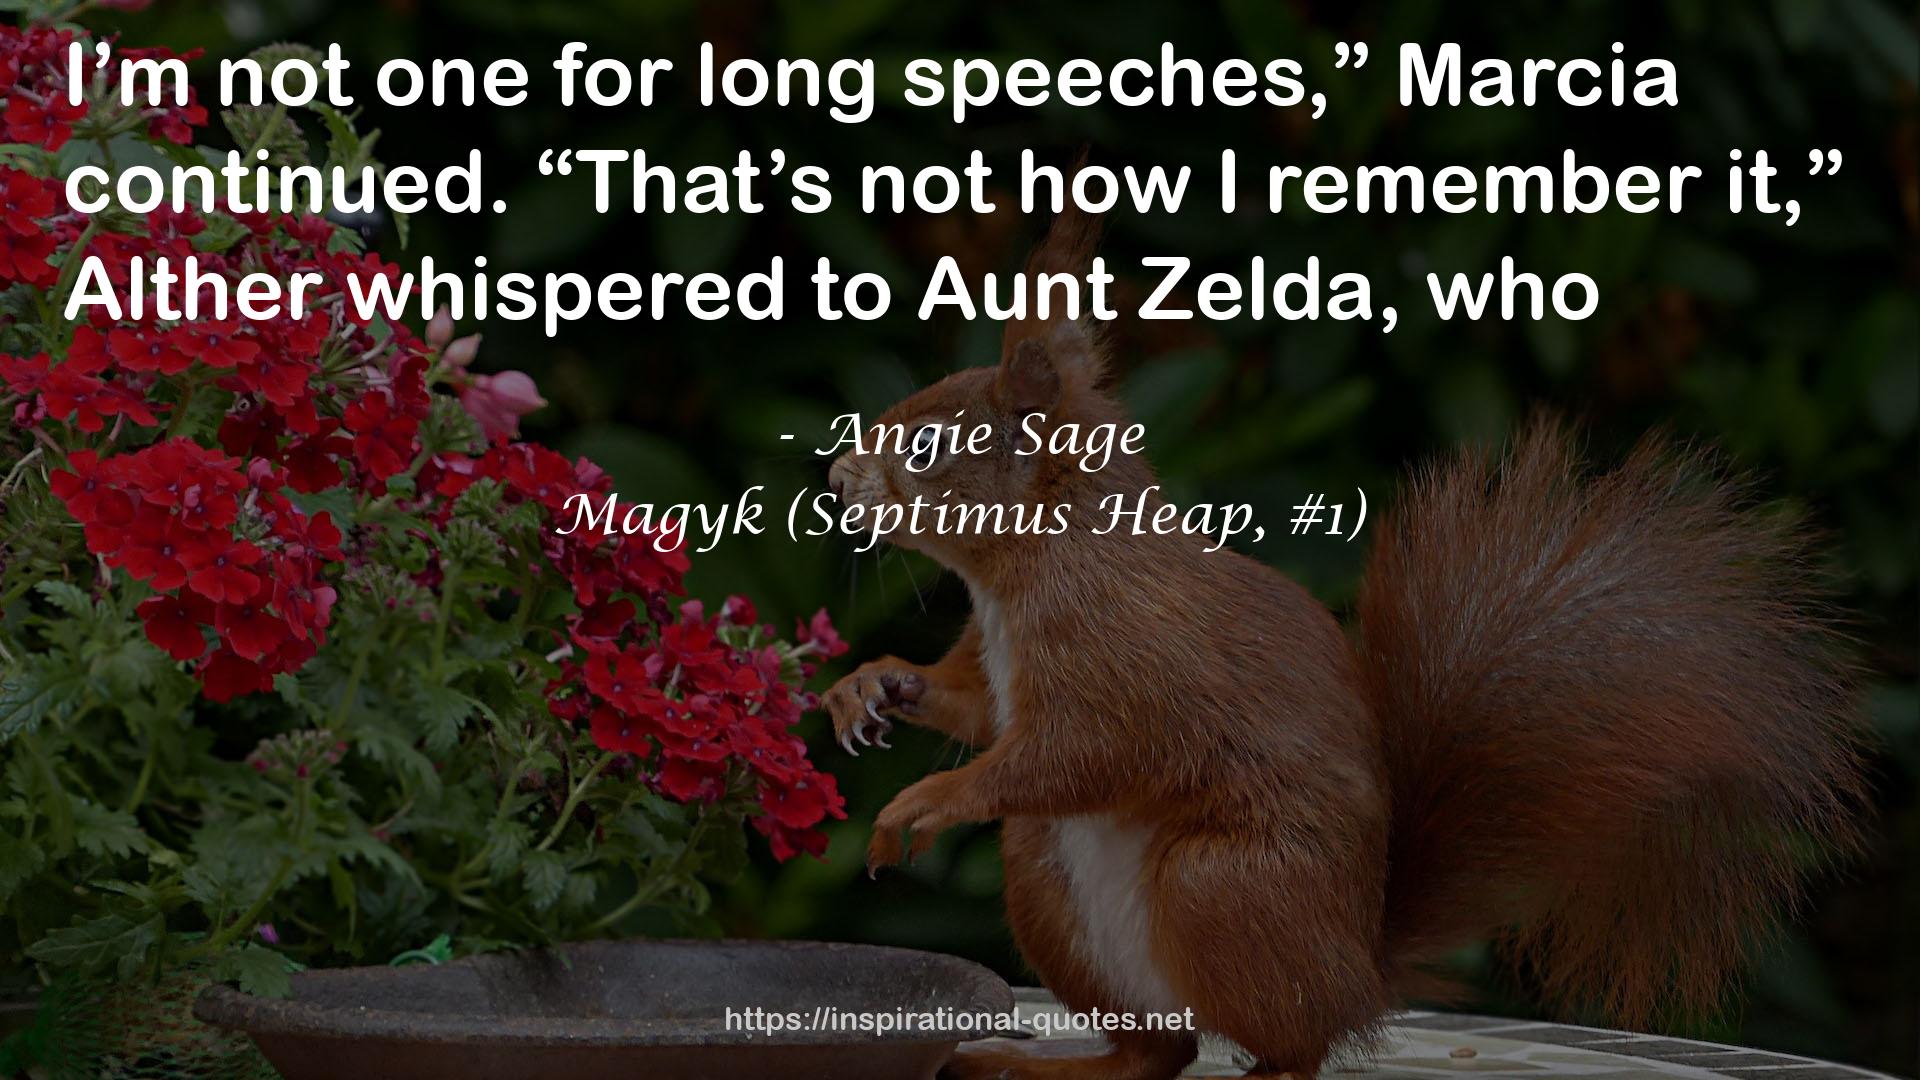 Magyk (Septimus Heap, #1) QUOTES